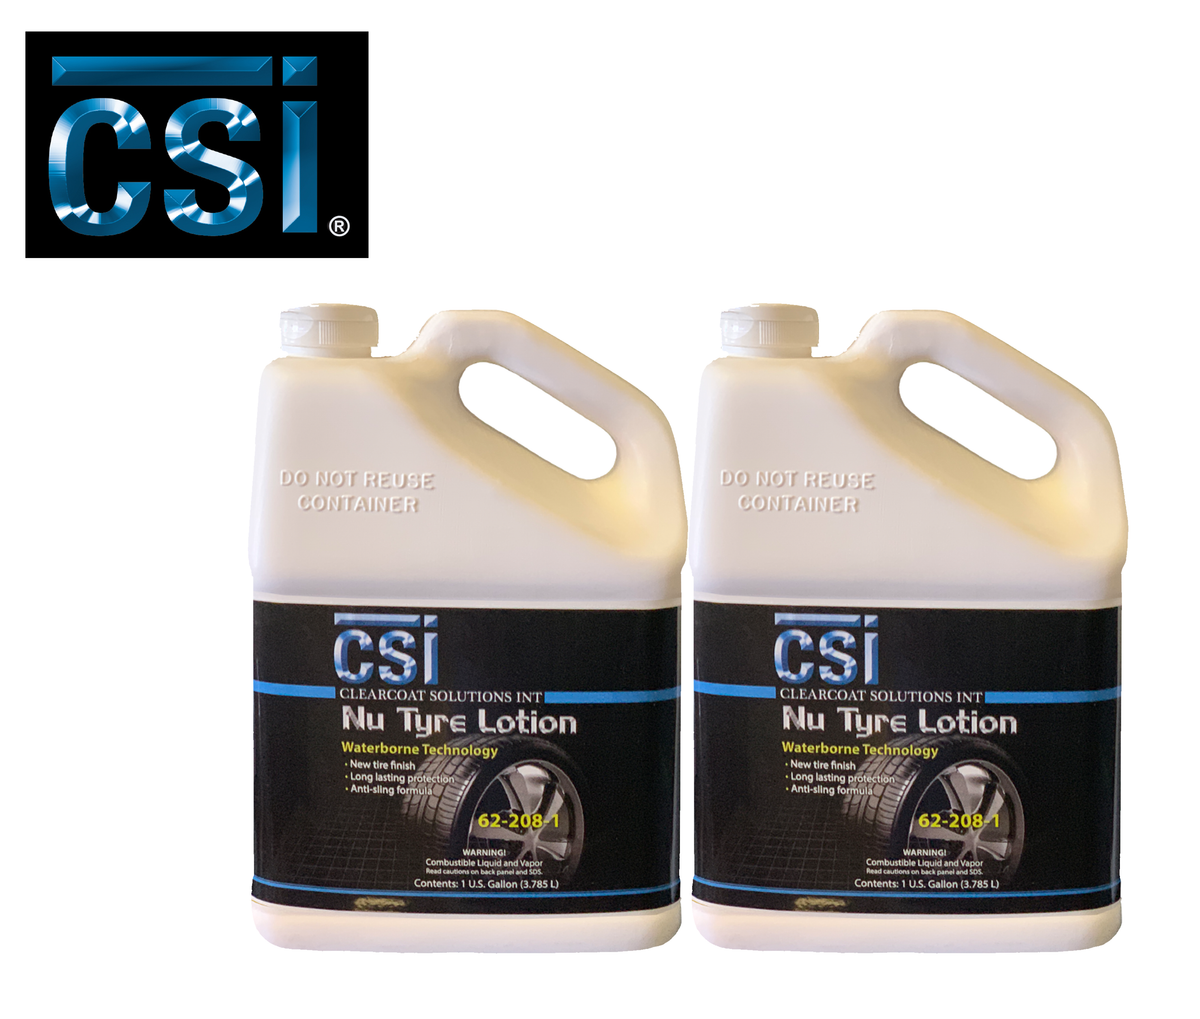 CSI 62-208-1 Nu Tyre Lotion (Gallon) two gallon special offer